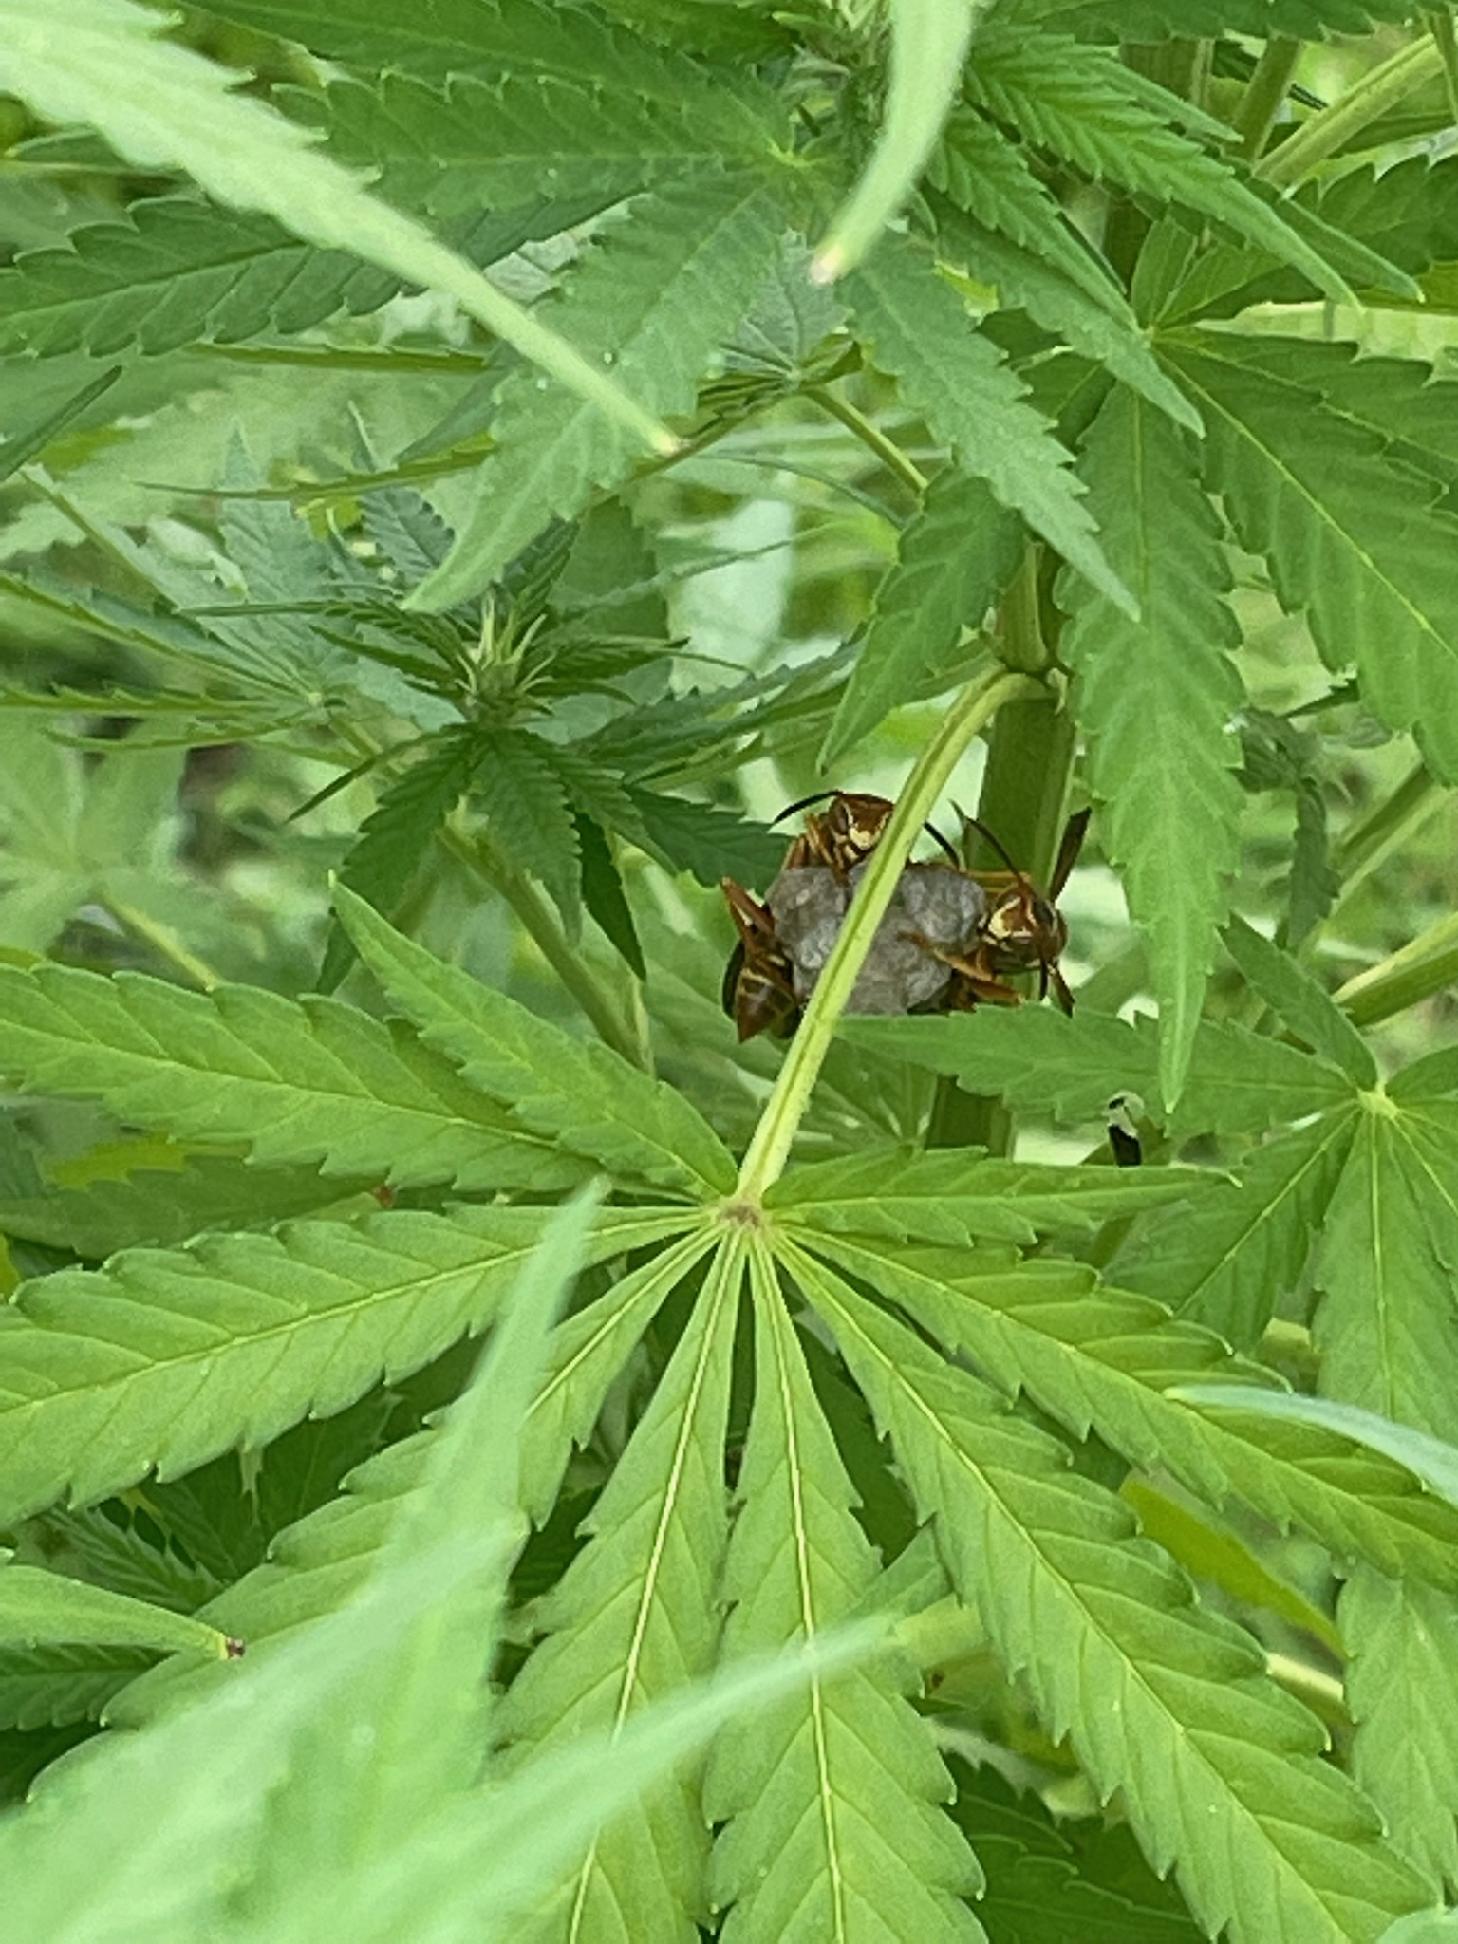 Look what i found in my plant